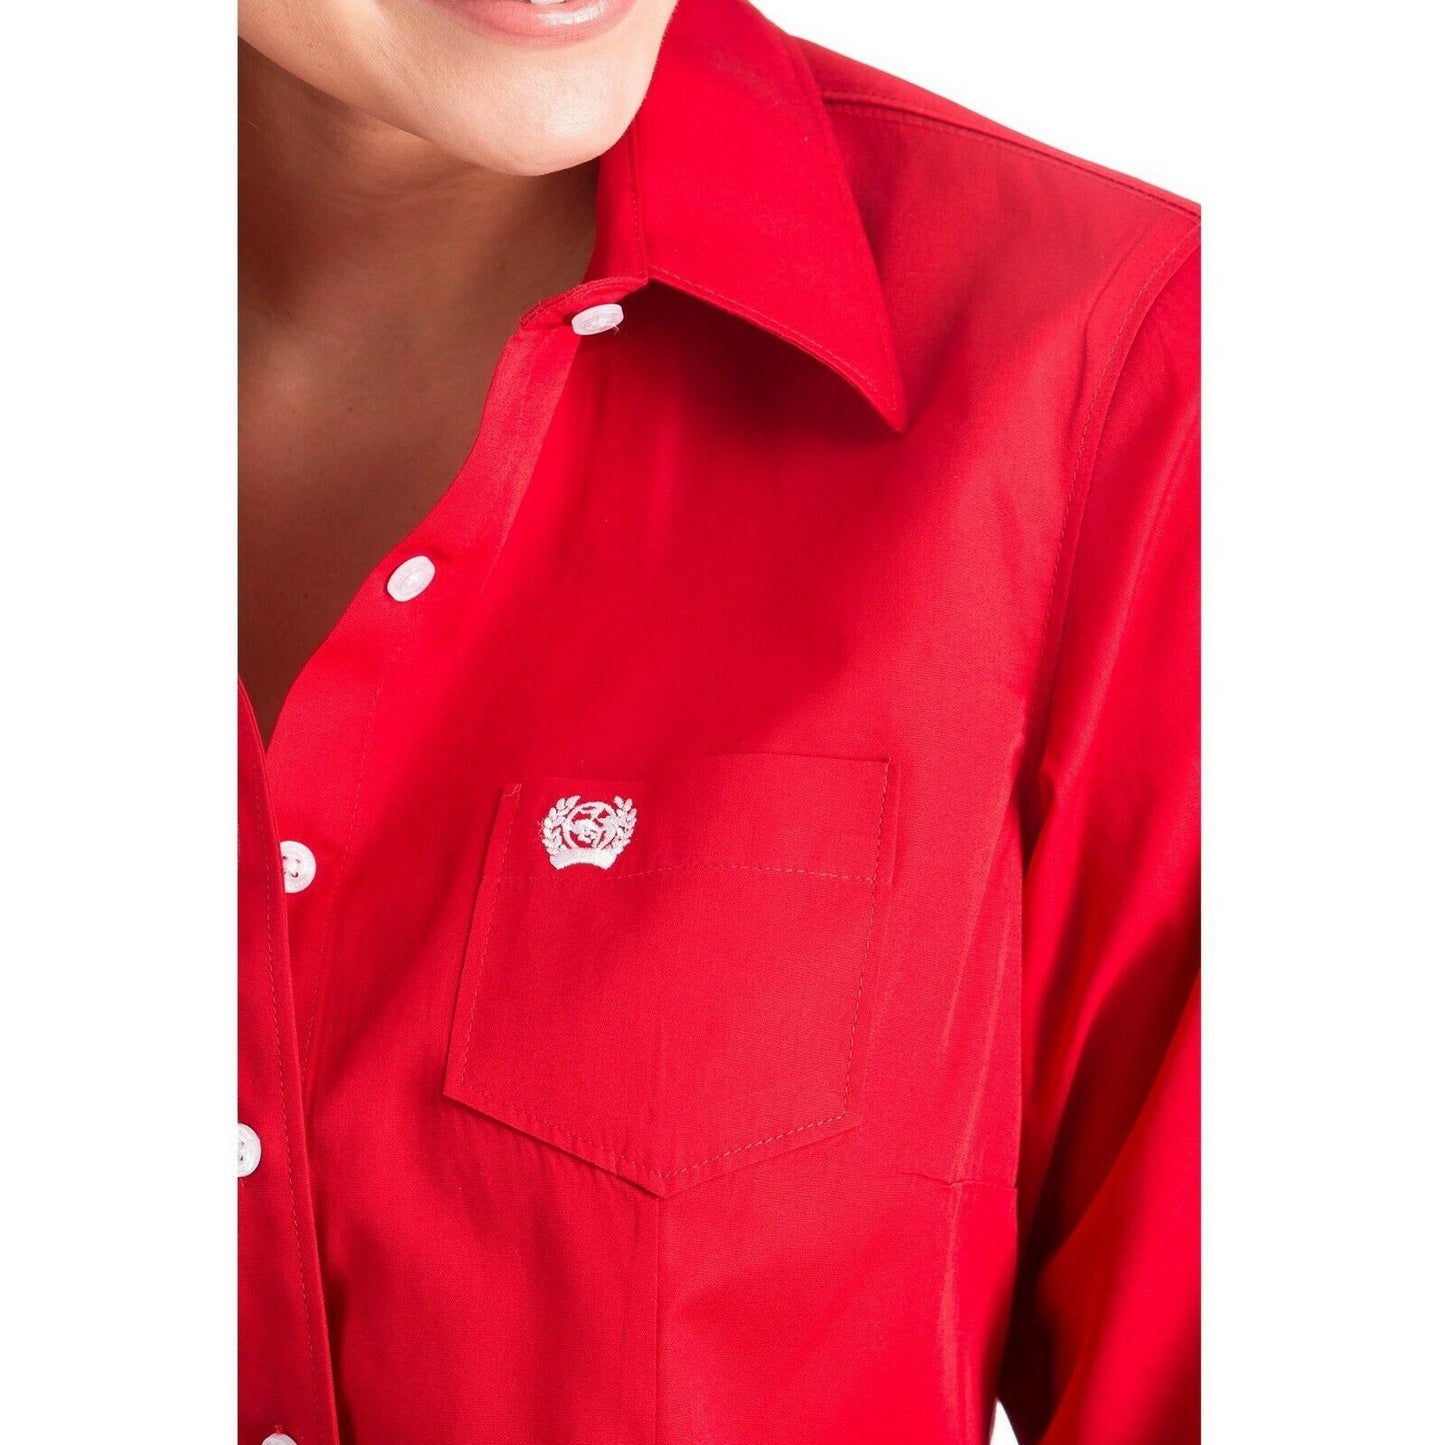 Cinch Ladies Solid Red Button-Down Shirt MSW9164032